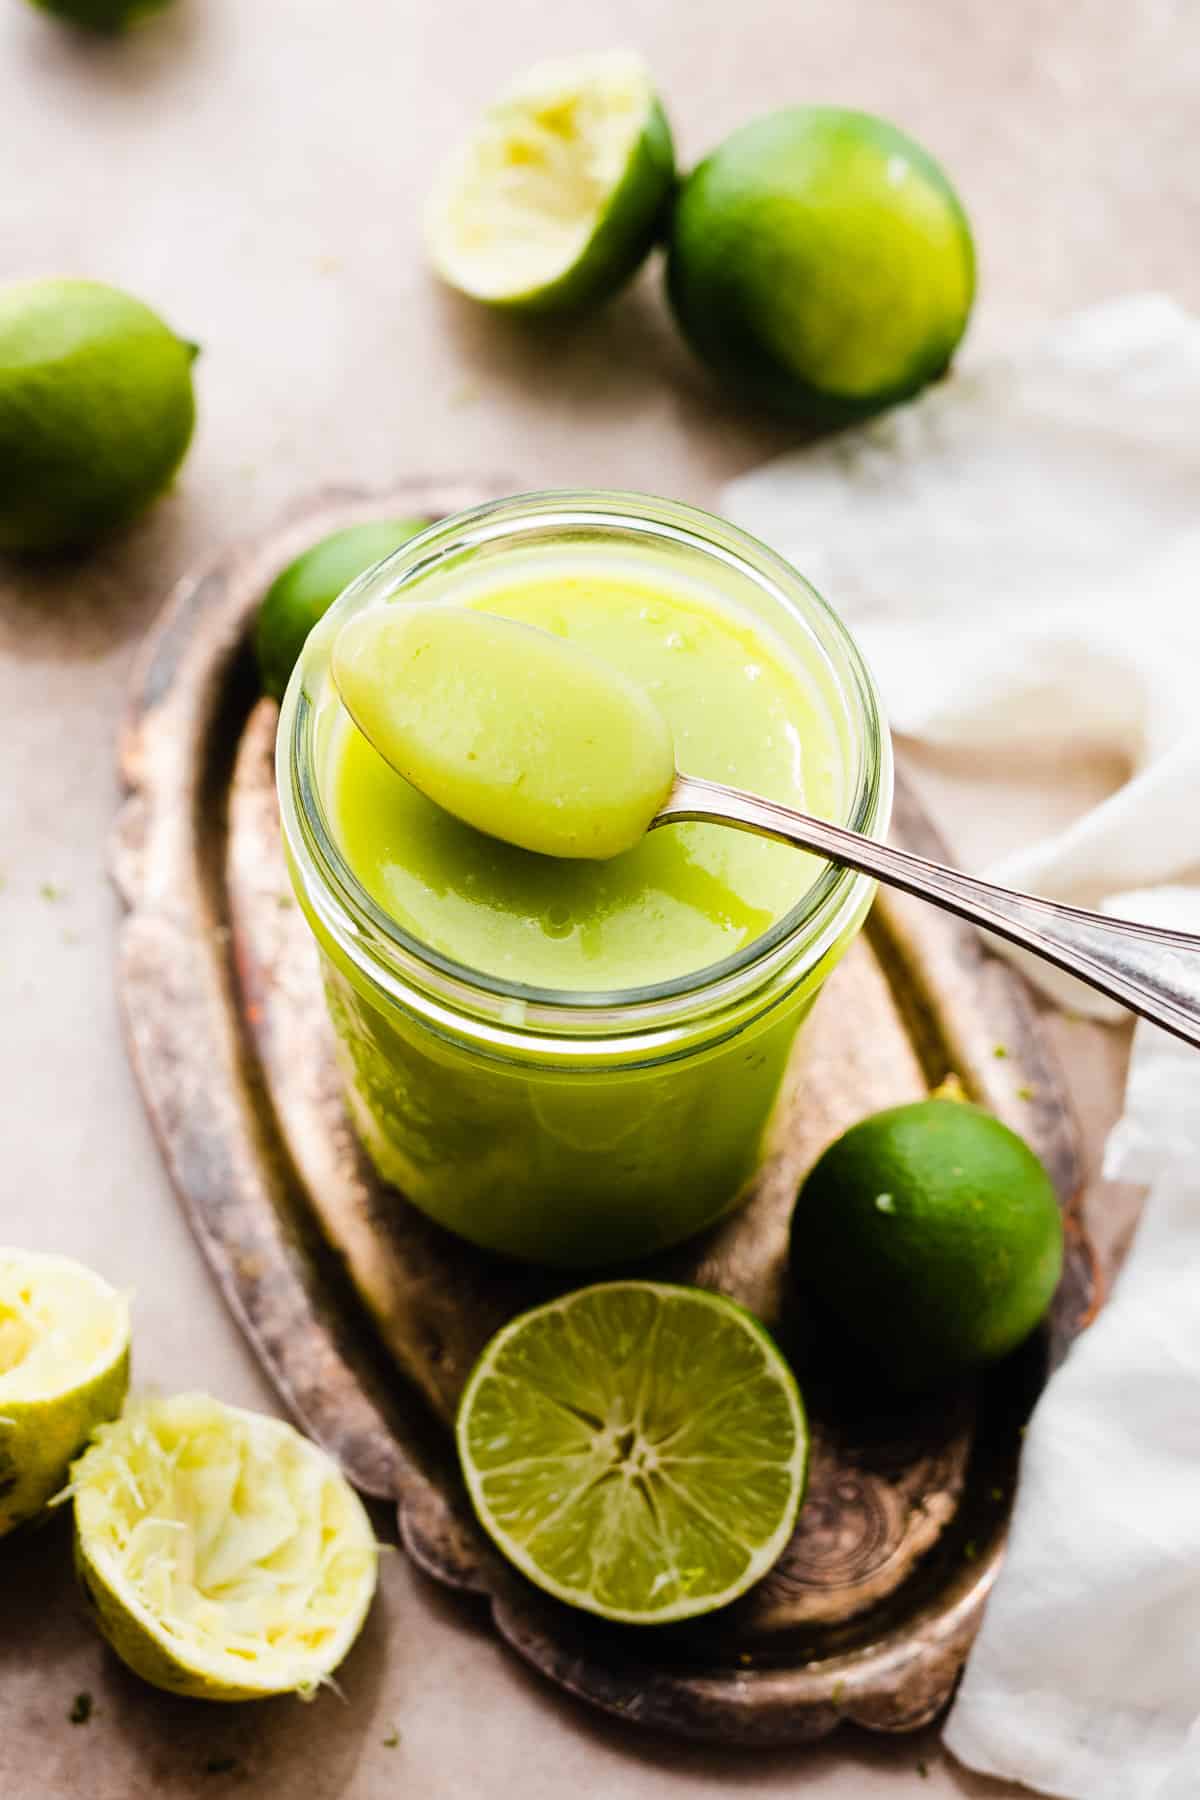 A spoon resting on a jar of bright green lime curd.